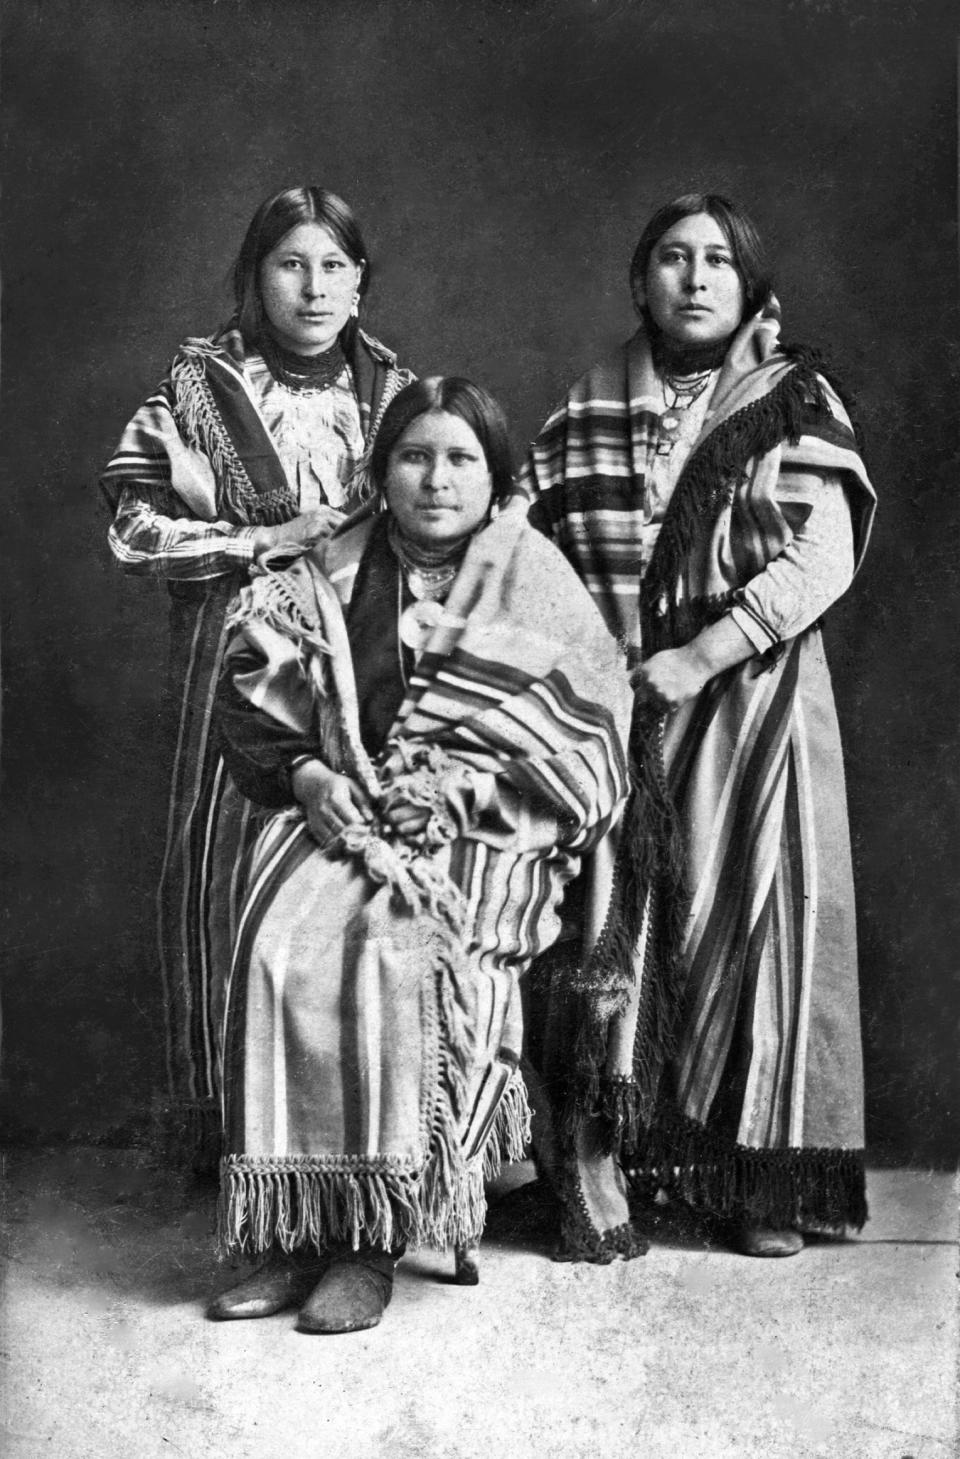 From right, Mollie Burkhart is pictured with her sisters Anna and Minnie in a photo from "Killers of the Flower Moon: Adapted for Young Readers," by David Grann. In the new young readers edition of his 2017 best-selling book, Grann chronicles for teen audiences the slayings of Osage Nation citizens in 1920s Oklahoma, after the oil boom made them rich. The brutal killings became known as the "Reign of Terror" and the center of a major investigation by the then-fledgling FBI.